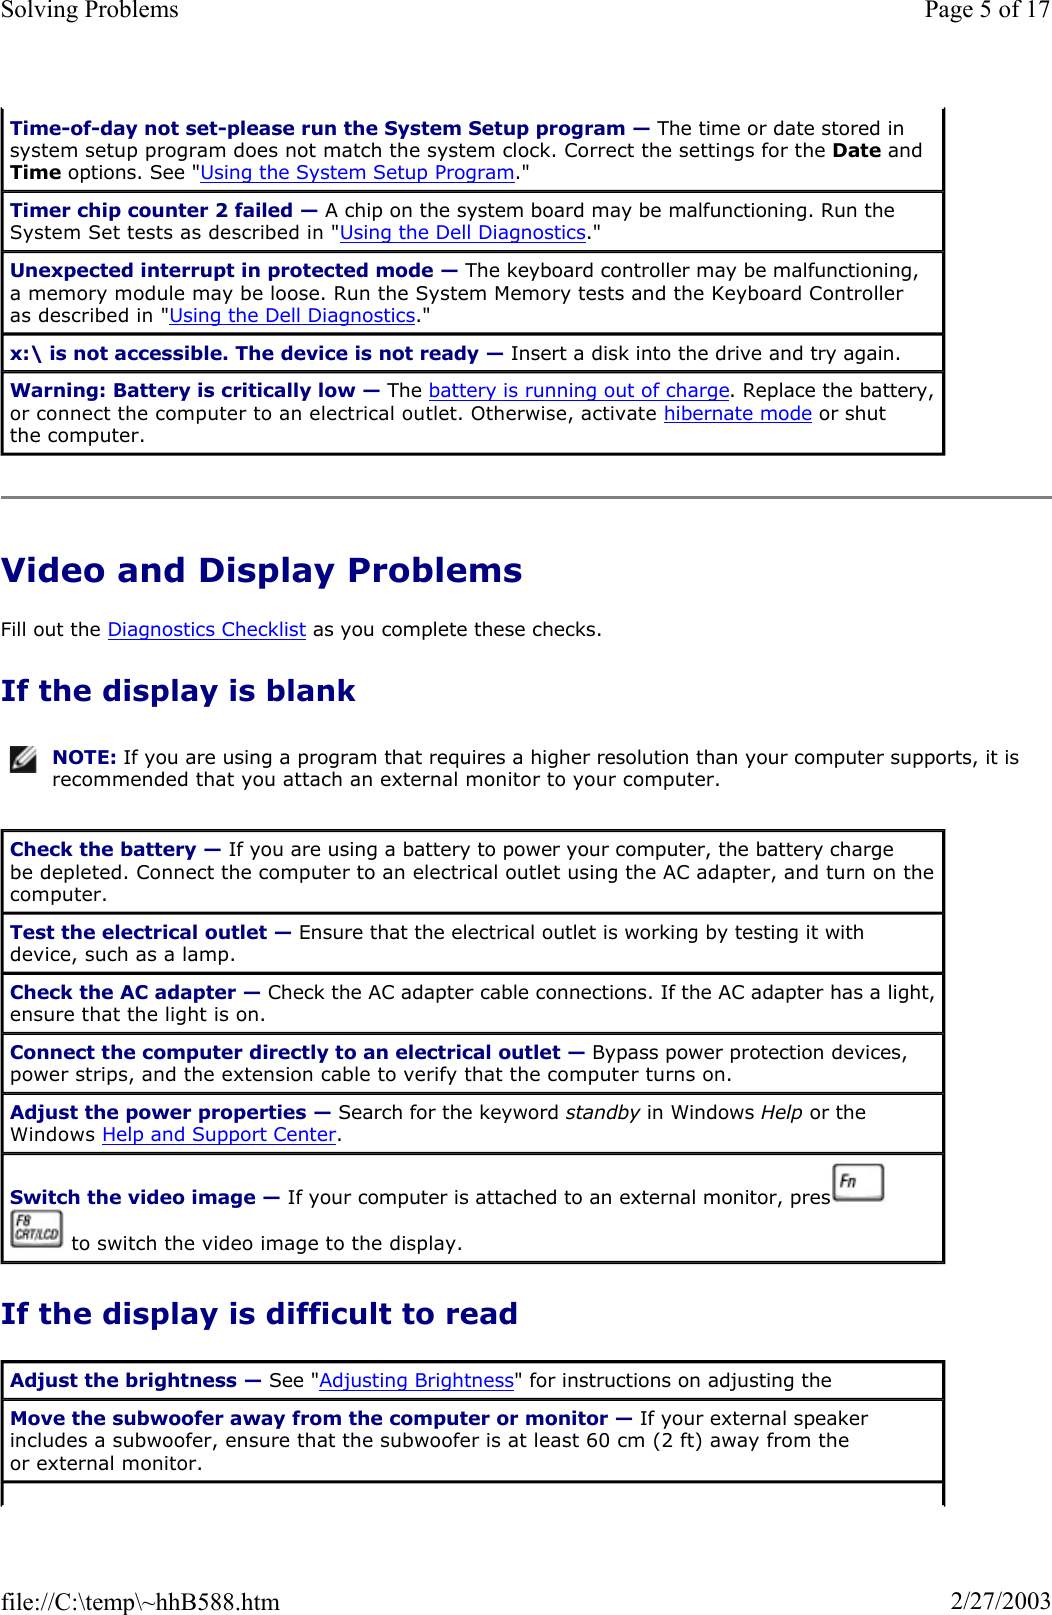 Video and Display Problems Fill out the Diagnostics Checklist as you complete these checks. If the display is blank If the display is difficult to read Time-of-day not set-please run the System Setup program — The time or date stored in system setup program does not match the system clock. Correct the settings for the Date and Time options. See &quot;Using the System Setup Program.&quot;Timer chip counter 2 failed — A chip on the system board may be malfunctioning. Run the System Set tests as described in &quot;Using the Dell Diagnostics.&quot;Unexpected interrupt in protected mode — The keyboard controller may be malfunctioning, a memory module may be loose. Run the System Memory tests and the Keyboard Controller as described in &quot;Using the Dell Diagnostics.&quot;x:\ is not accessible. The device is not ready — Insert a disk into the drive and try again. Warning: Battery is critically low — The battery is running out of charge. Replace the battery, or connect the computer to an electrical outlet. Otherwise, activate hibernate mode or shut the computer. NOTE: If you are using a program that requires a higher resolution than your computer supports, it is recommended that you attach an external monitor to your computer.Check the battery — If you are using a battery to power your computer, the battery charge be depleted. Connect the computer to an electrical outlet using the AC adapter, and turn on the computer. Test the electrical outlet — Ensure that the electrical outlet is working by testing it with device, such as a lamp. Check the AC adapter — Check the AC adapter cable connections. If the AC adapter has a light, ensure that the light is on. Connect the computer directly to an electrical outlet — Bypass power protection devices, power strips, and the extension cable to verify that the computer turns on.  Adjust the power properties — Search for the keyword standby in Windows Help or the Windows Help and Support Center.Switch the video image — If your computer is attached to an external monitor, press    to switch the video image to the display. Adjust the brightness — See &quot;Adjusting Brightness&quot; for instructions on adjusting the Move the subwoofer away from the computer or monitor — If your external speaker includes a subwoofer, ensure that the subwoofer is at least 60 cm (2 ft) away from the or external monitor. Page 5 of 17Solving Problems2/27/2003file://C:\temp\~hhB588.htm